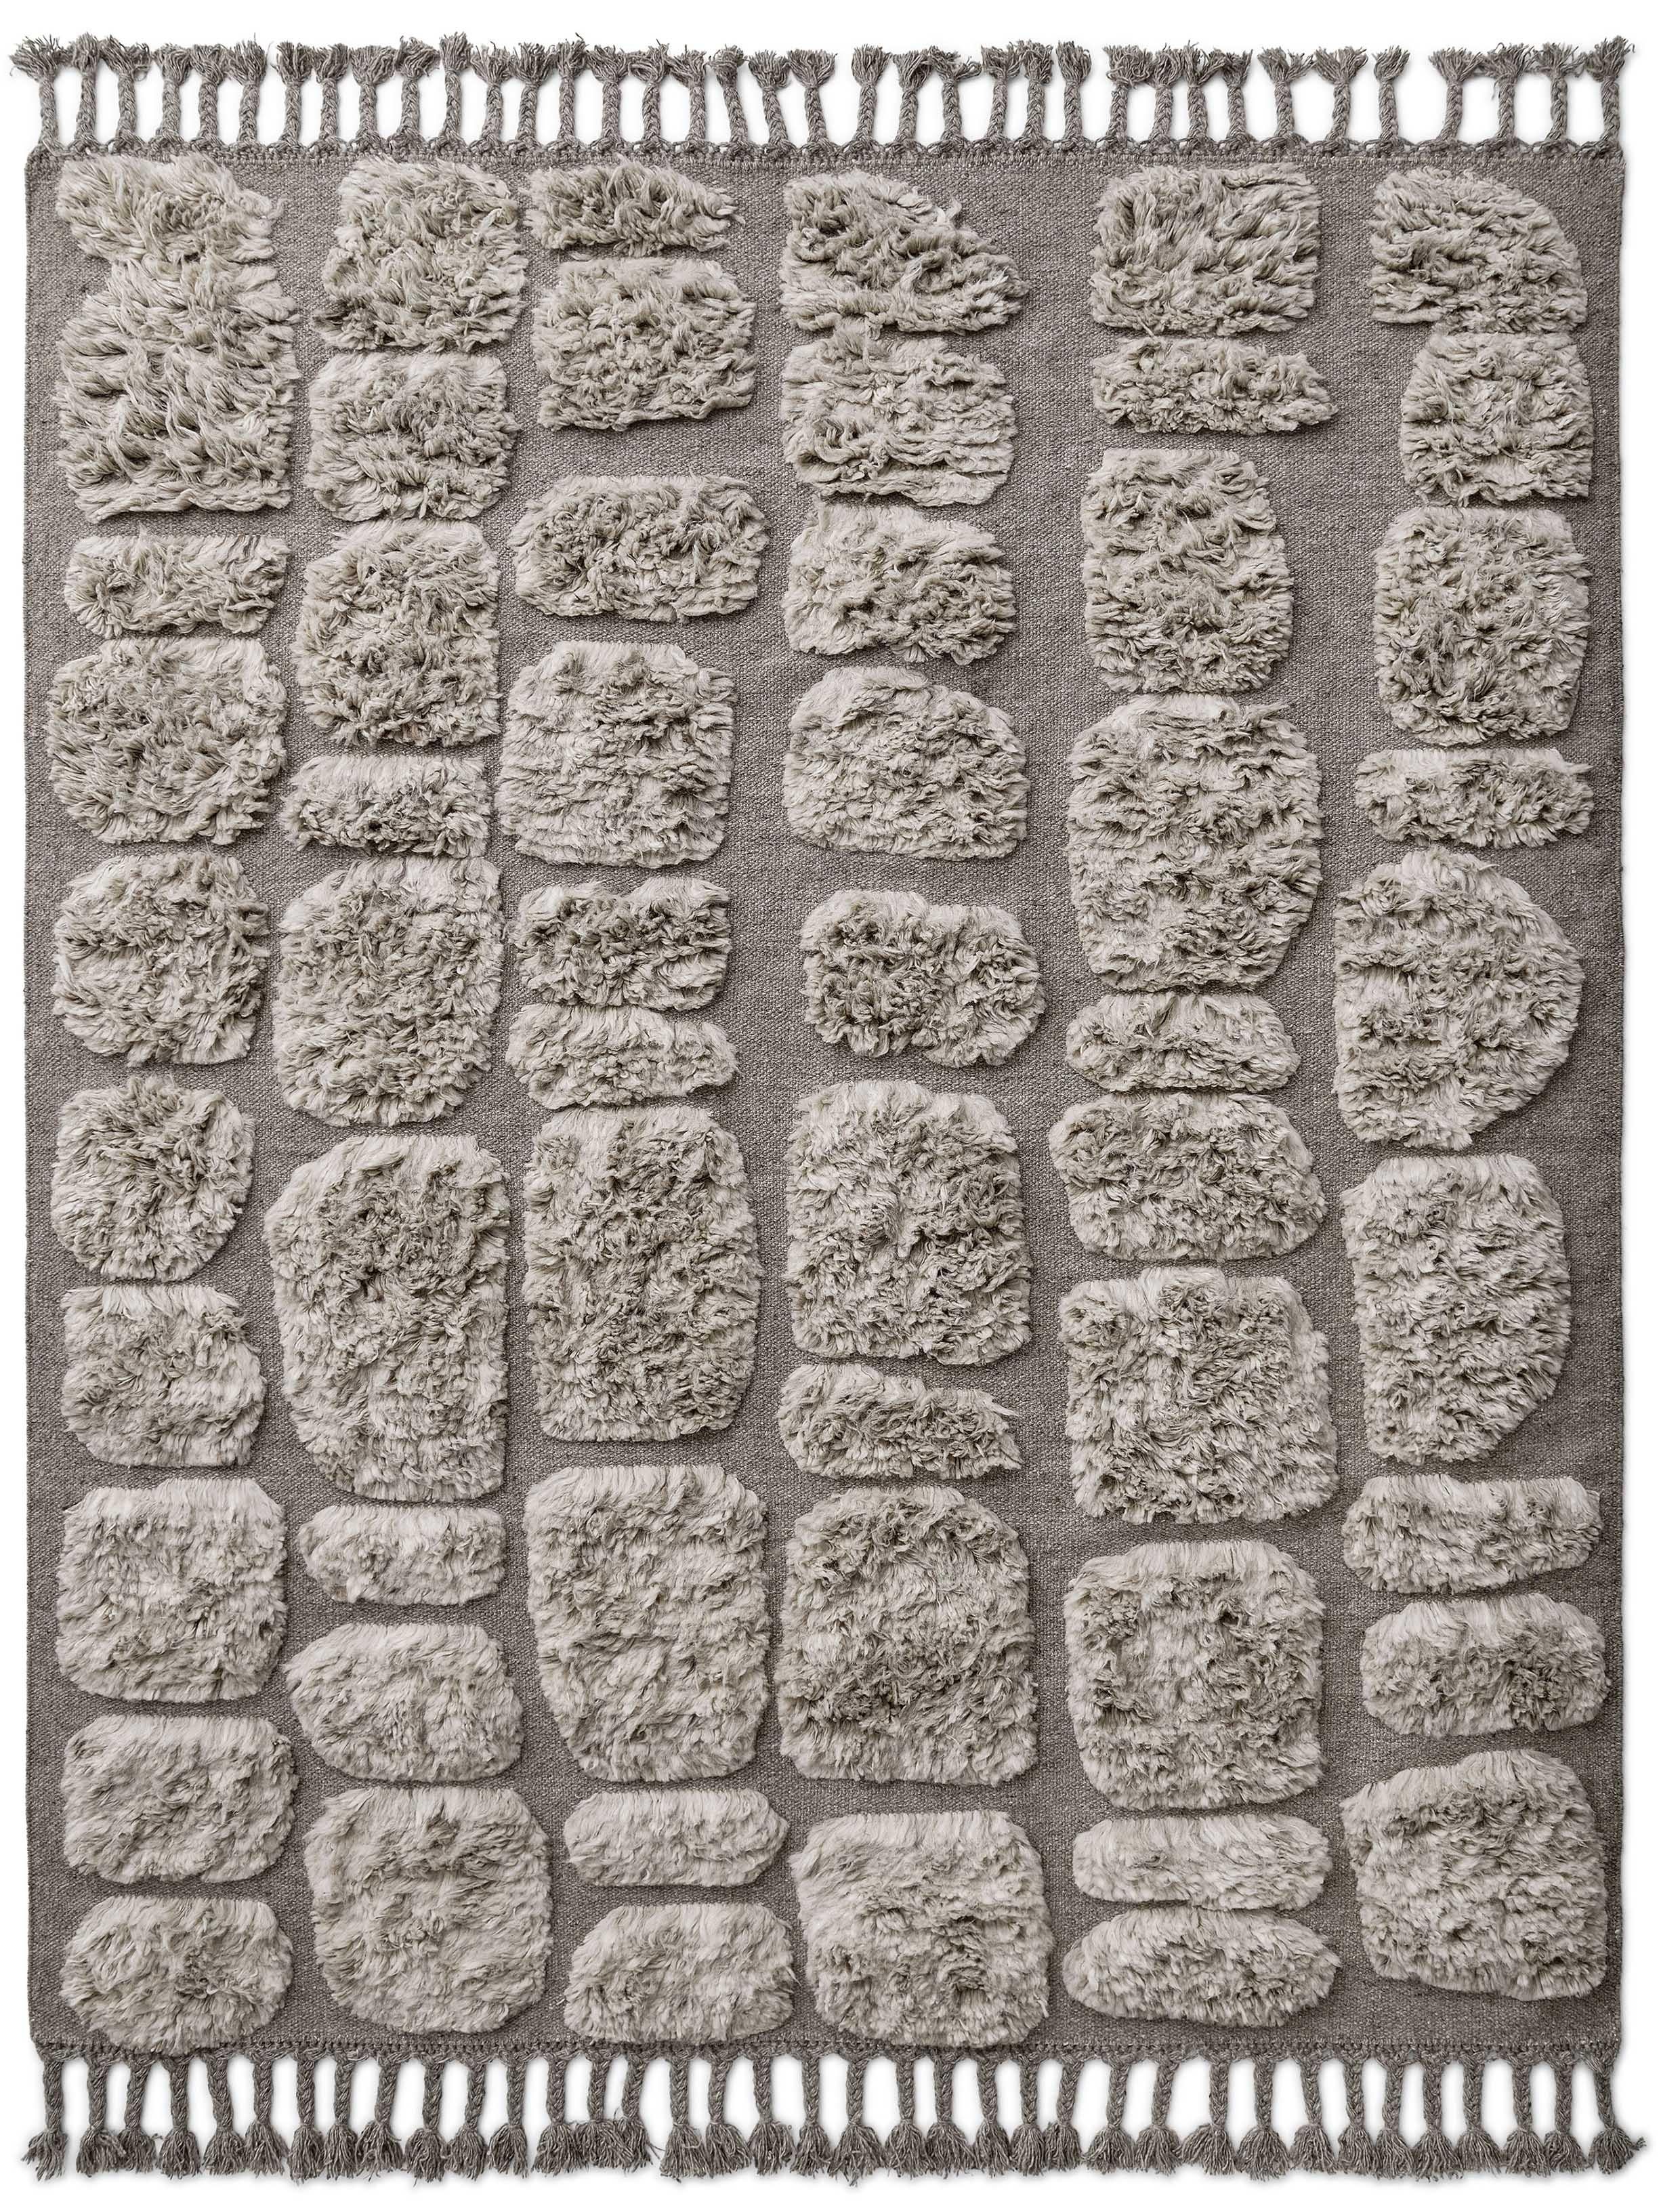 No.03 Rug by Cappelen Dimyr
Dimensions: D290 x H350
Materials: 85% wool 15% cotton

no.03 is a contemporary yet timeless hand-knotted rug in natural wool. The soft fields of shaggy wool pattern creates an organic and bohemian vibe to this